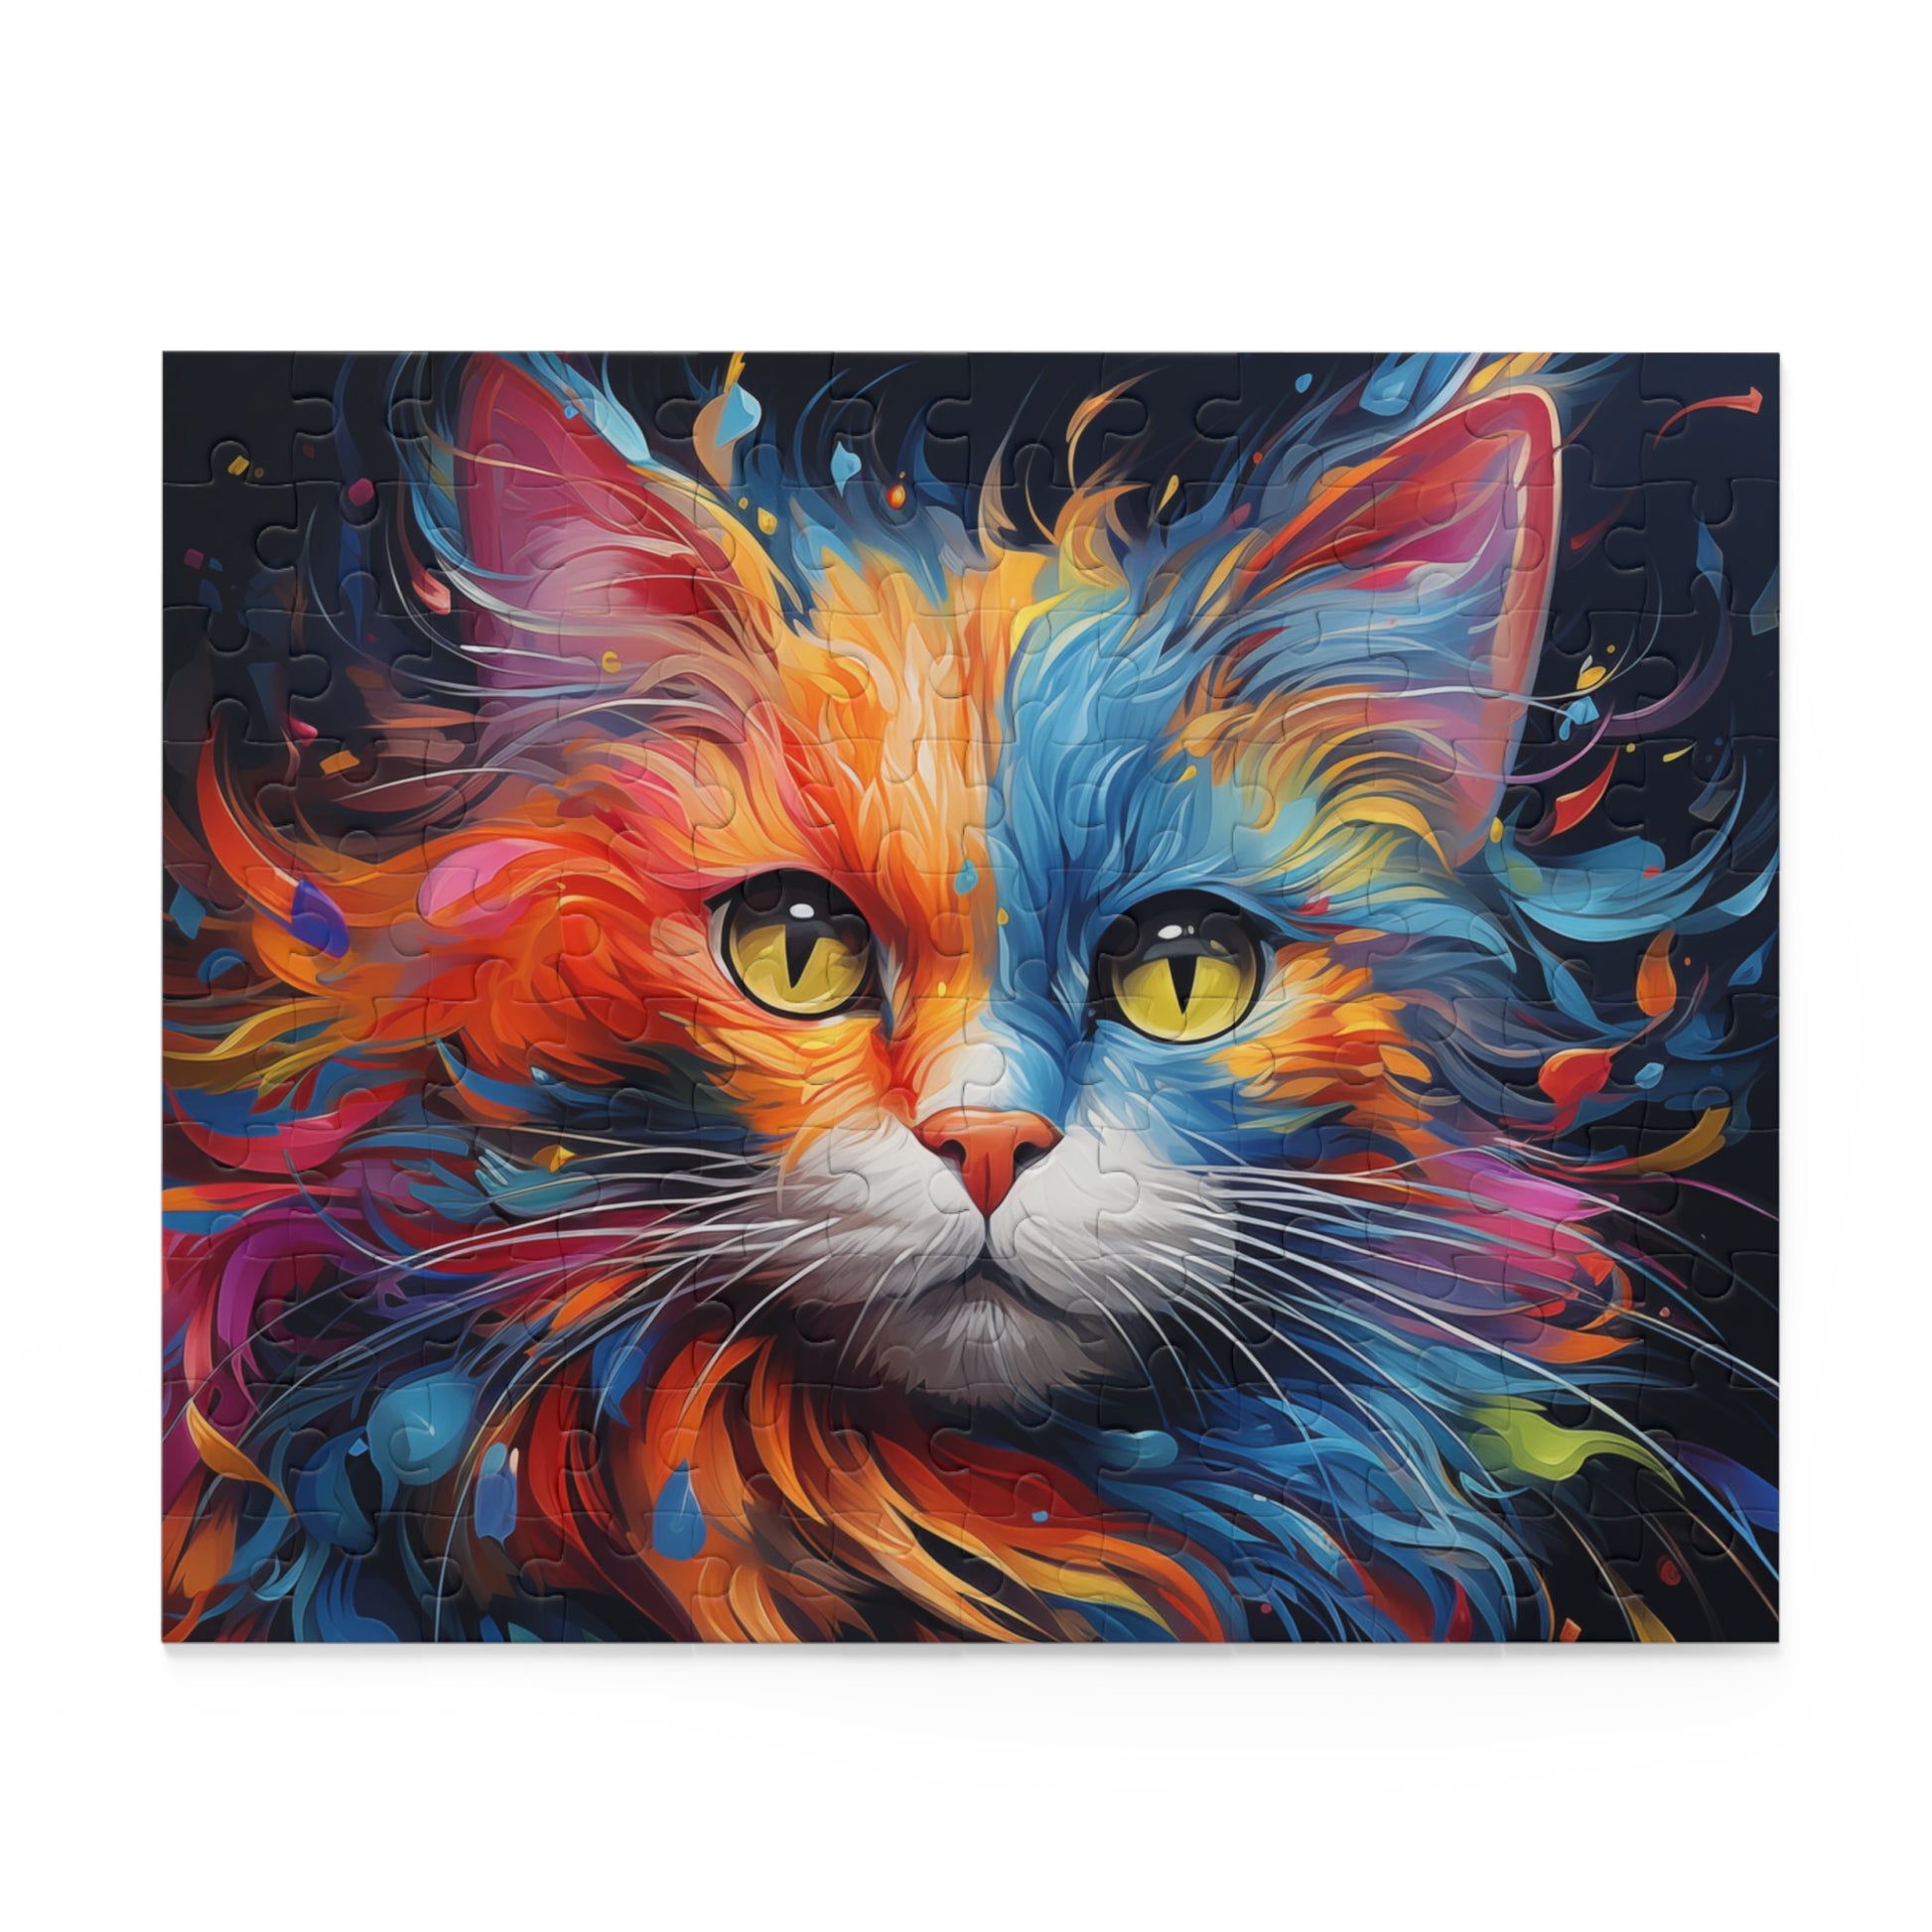 Abstract Watercolor Animal Cat Oil Paint Jigsaw Puzzle Adult Birthday Business Jigsaw Puzzle Gift for Him Funny Humorous Indoor Outdoor Game Gift For Her Online-2